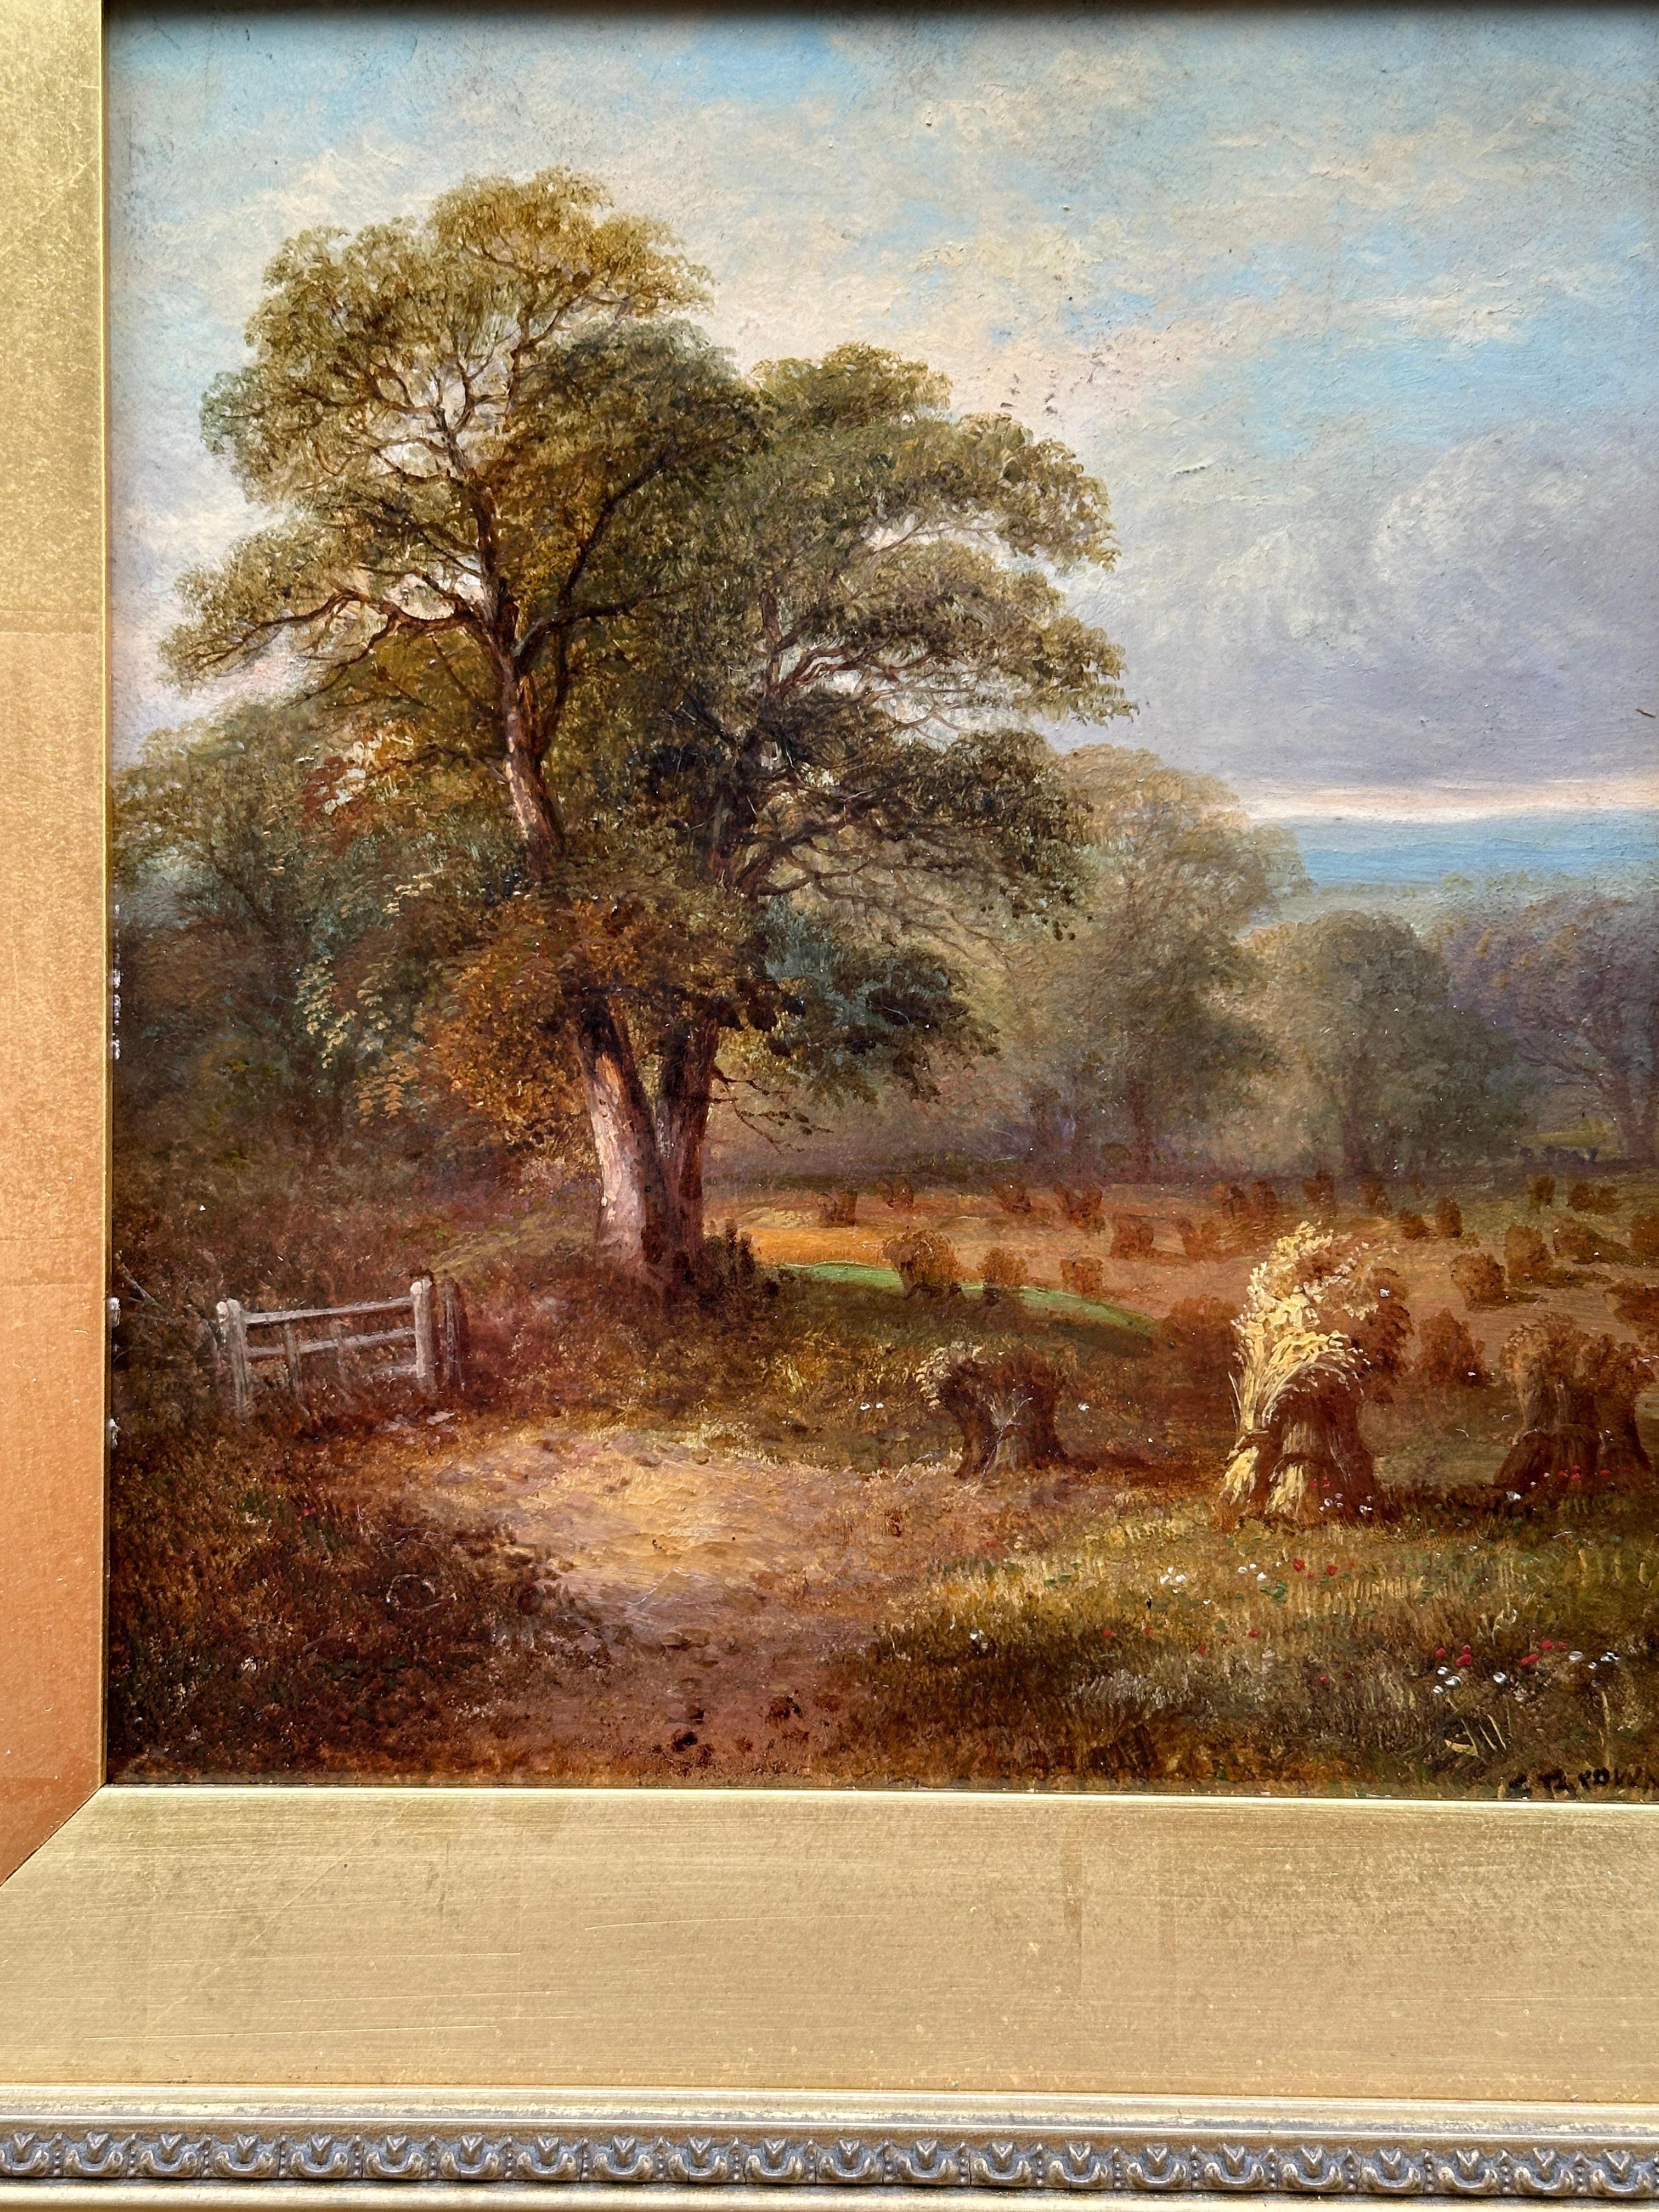 19th century English landscape with trees, a Harvest Field during Summertime - Painting by C. Brown